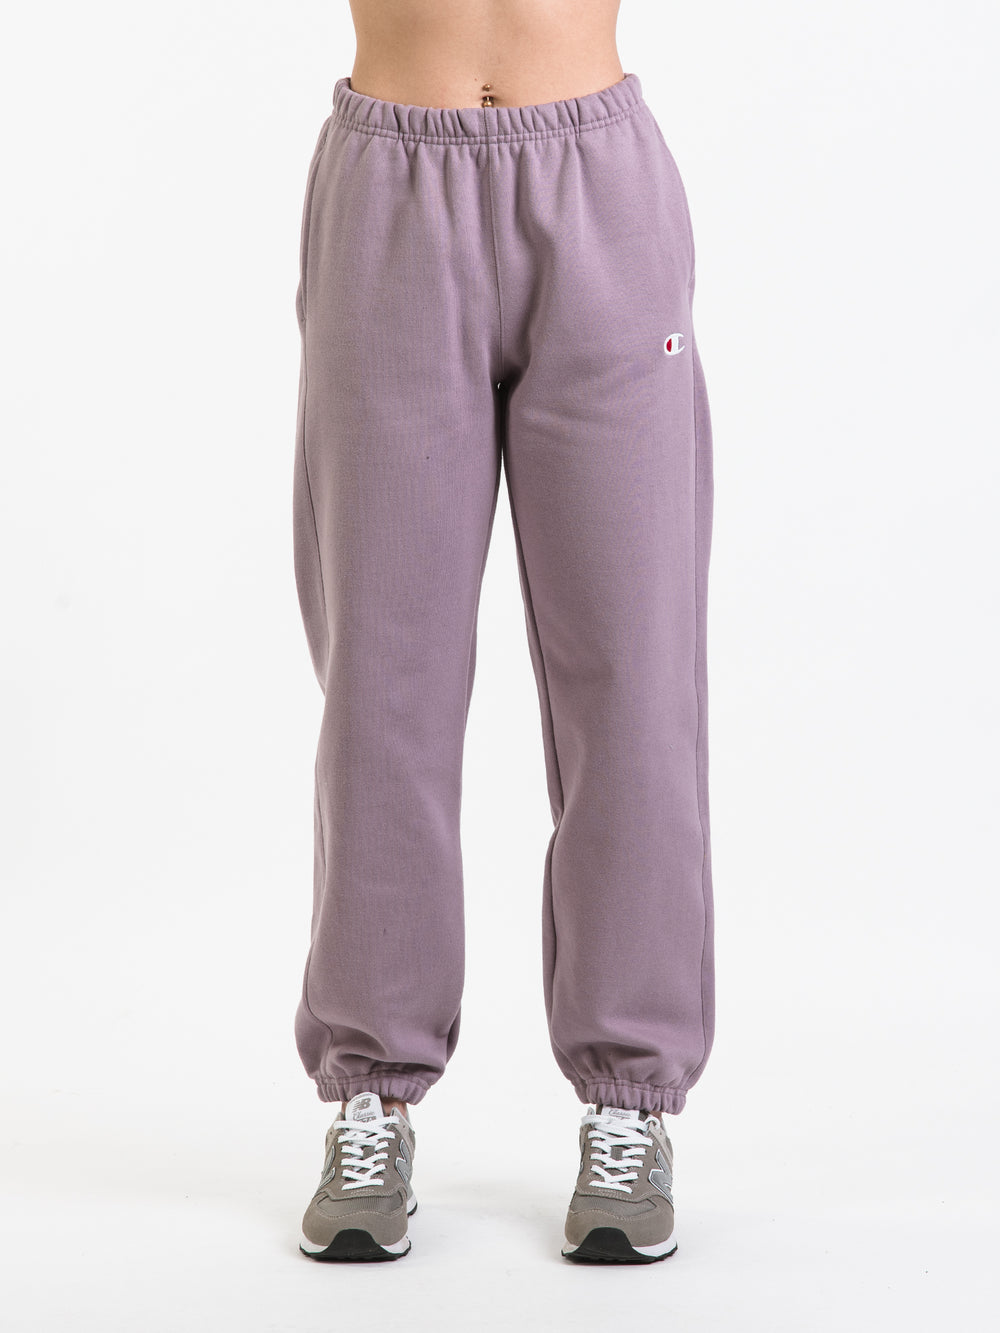 Champion x Hasbro Twister Women's Reverse Weave Joggers – That Shoe Store  and More